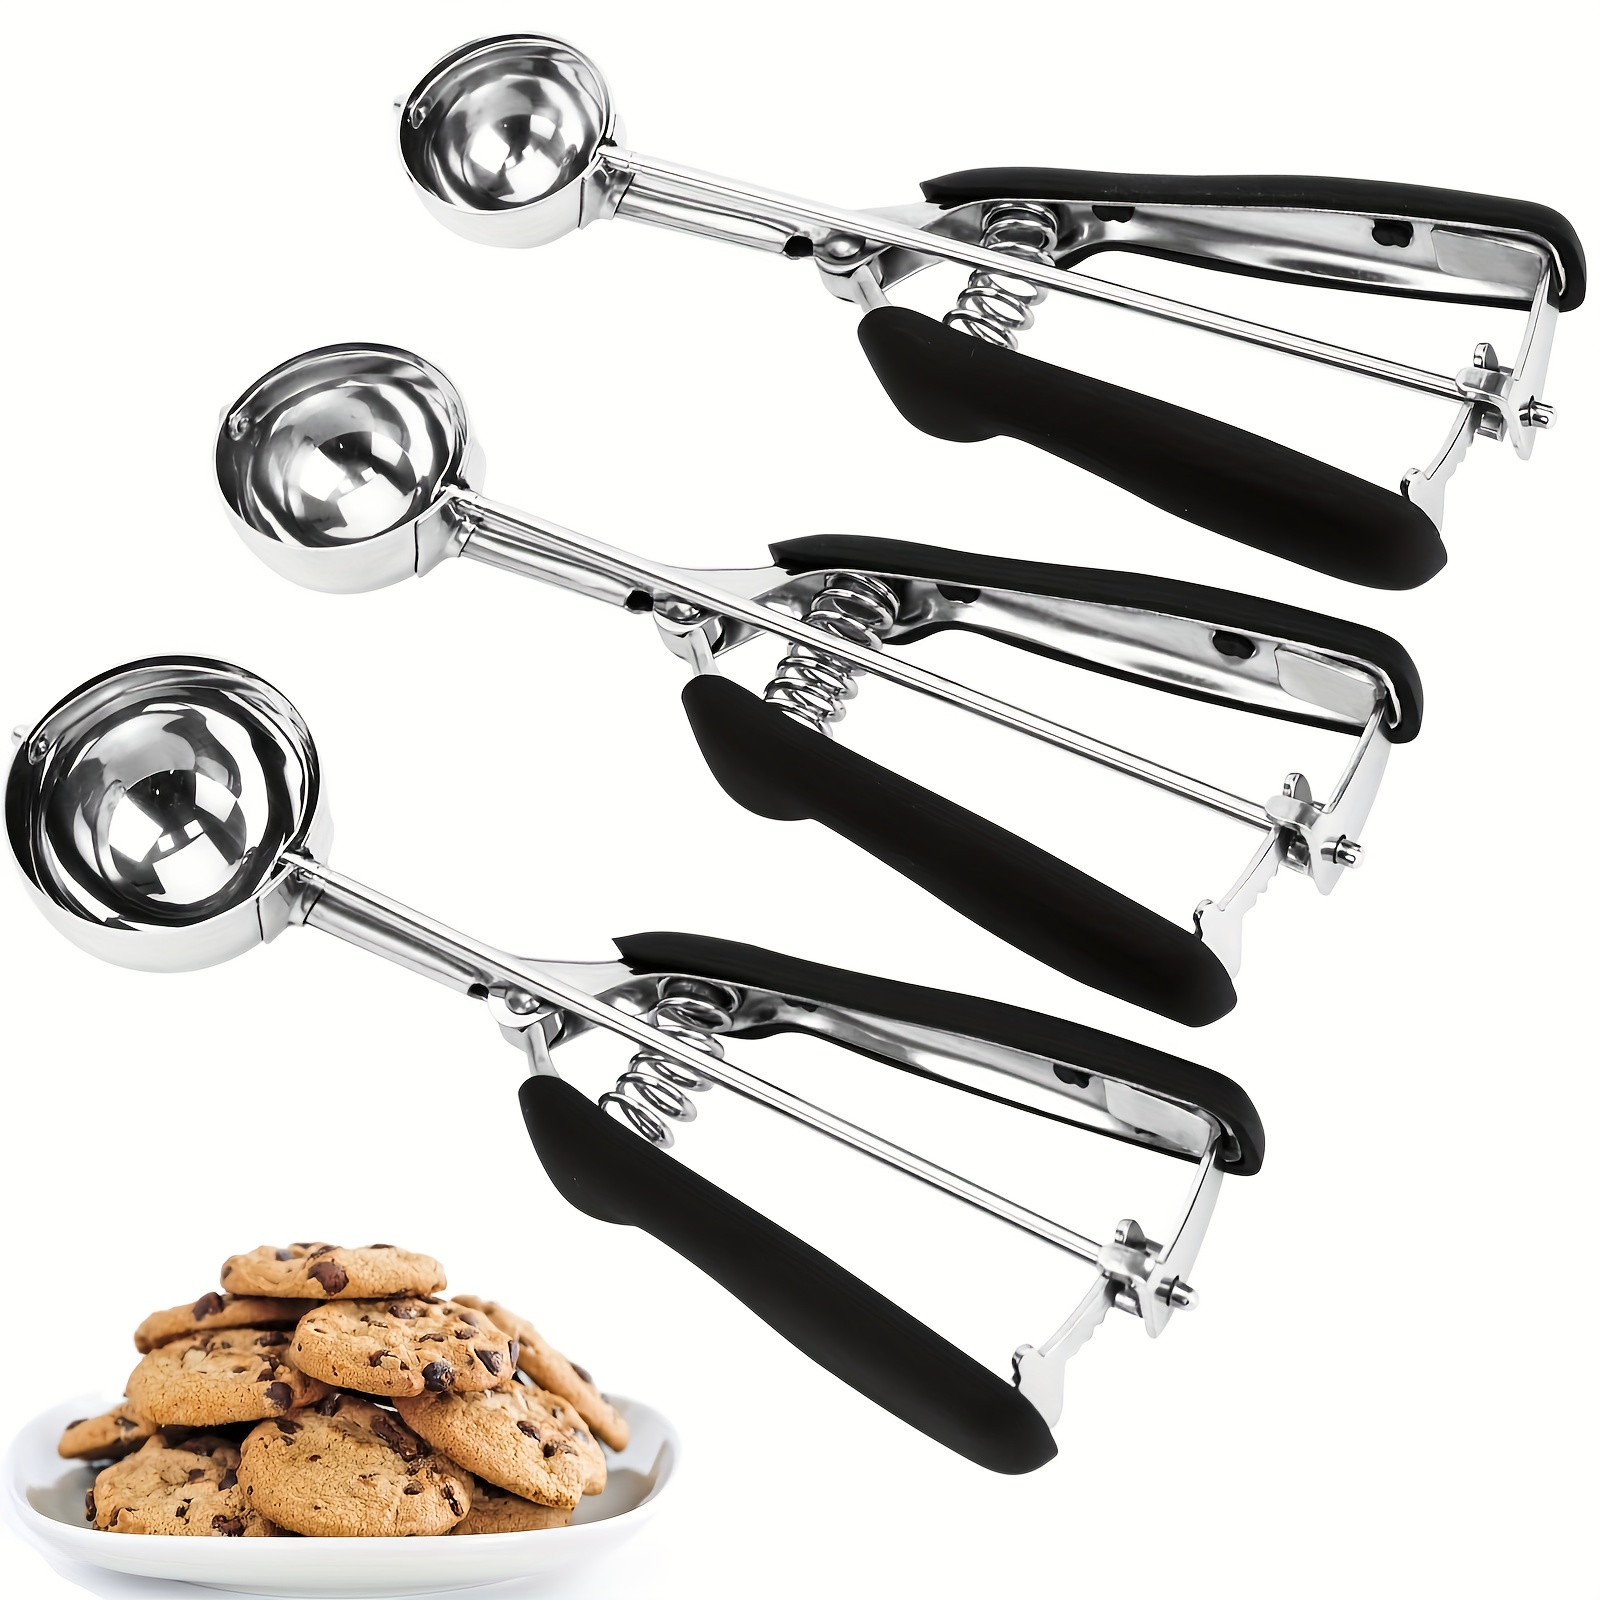 Cookie Dough Scoop Set, Cookie Scoops for Baking Set of 3, Small Ice Cream  Scoop with Trigger, Stainless Steel Melon Baller Scoop, Kitchen Cookie